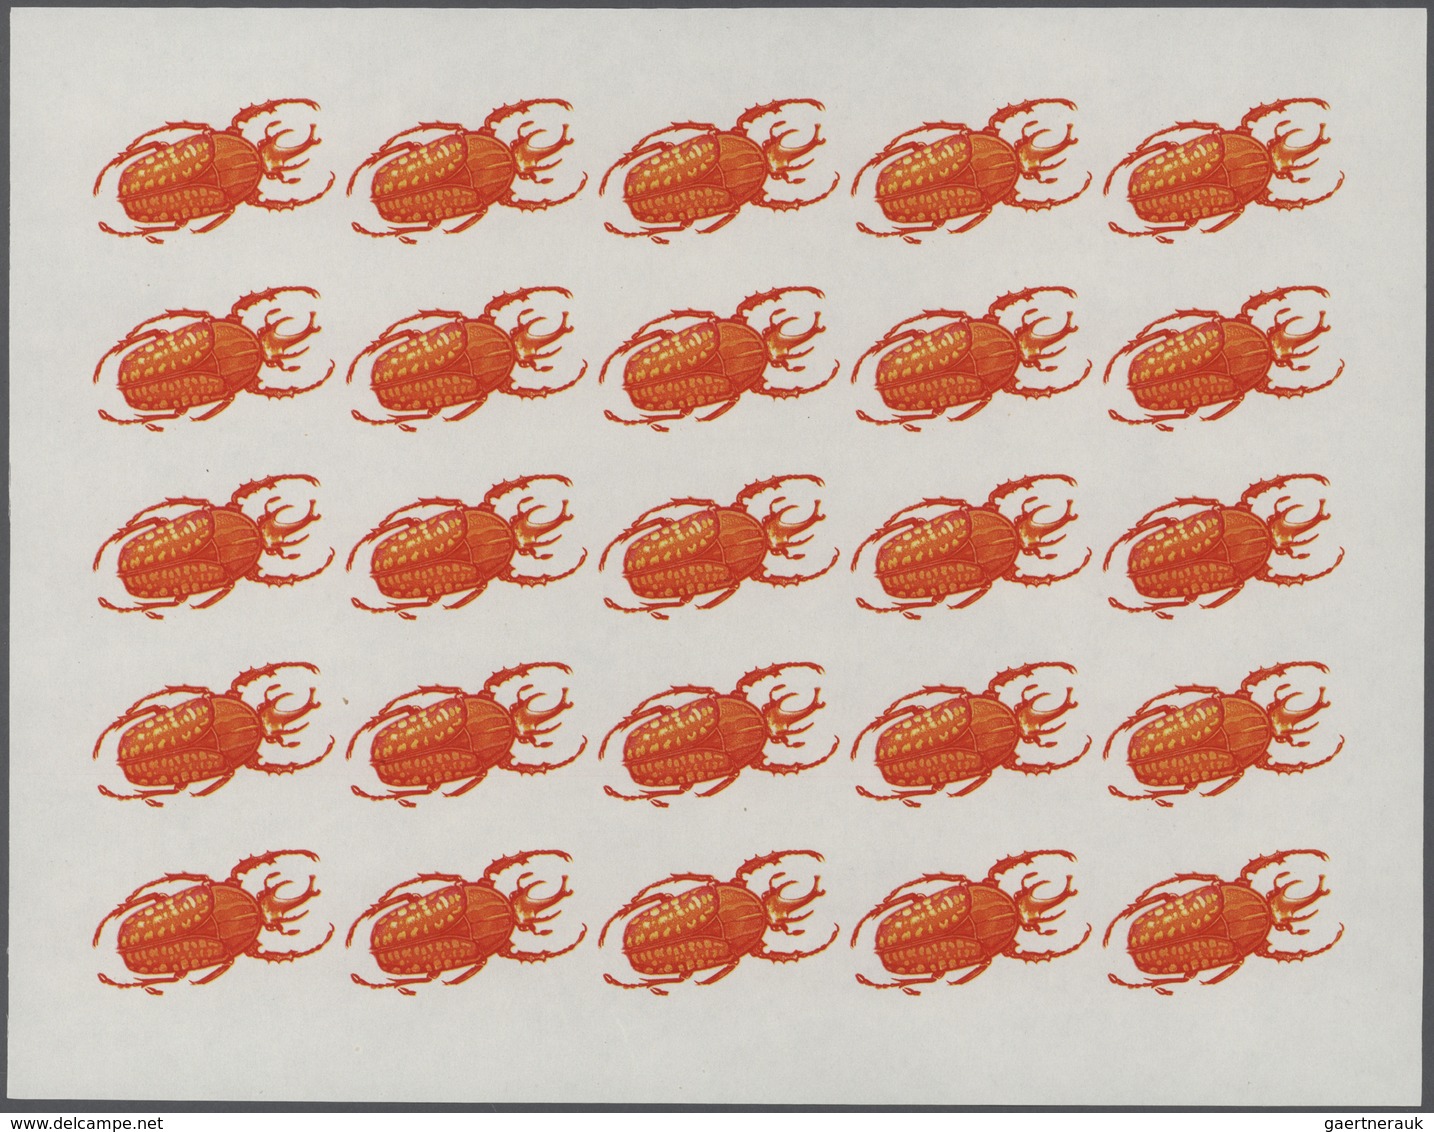 25722 Thematik: Tiere-Insekten / animals-insects: 1970, Burundi. Progressive proofs set of sheets for the